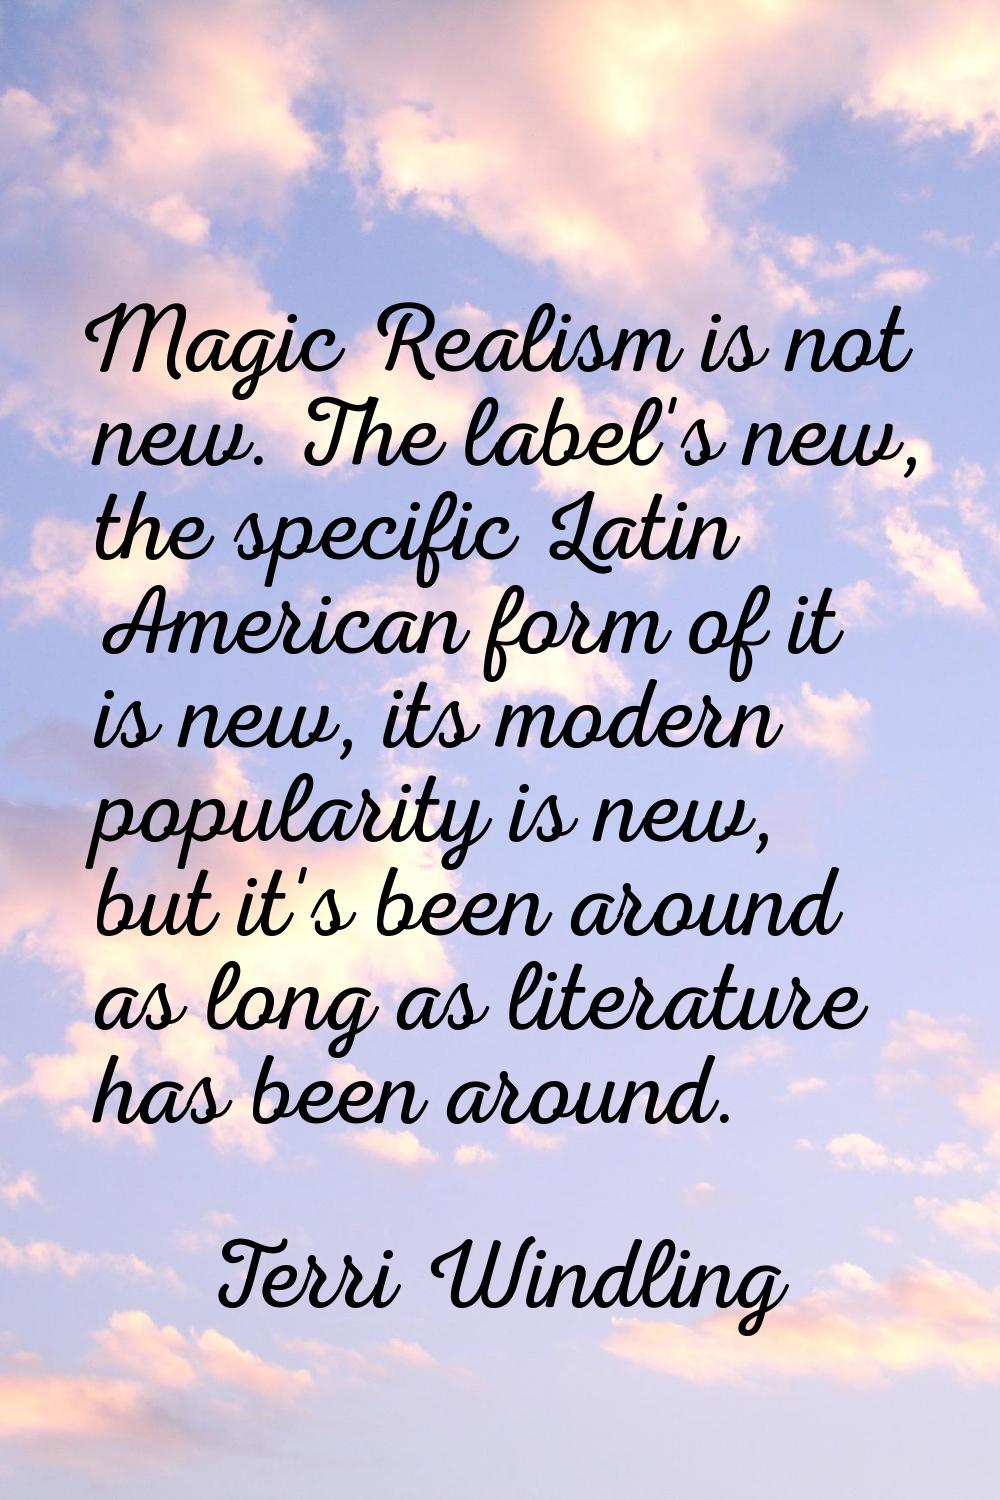 Magic Realism is not new. The label's new, the specific Latin American form of it is new, its moder